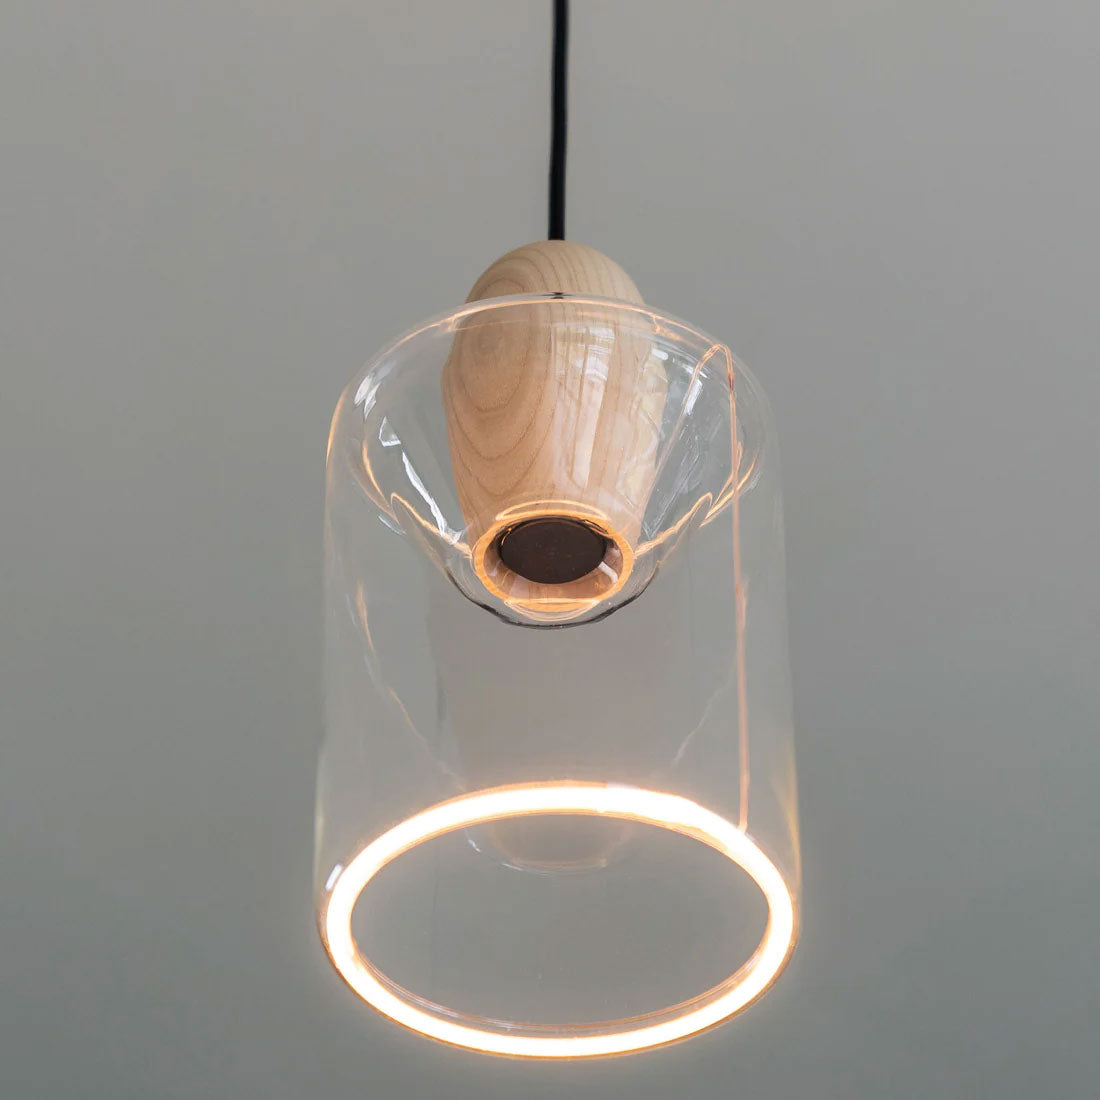 This glass lantern pendant light is made by Well Lit and sold by South Charlotte Fine Lighting